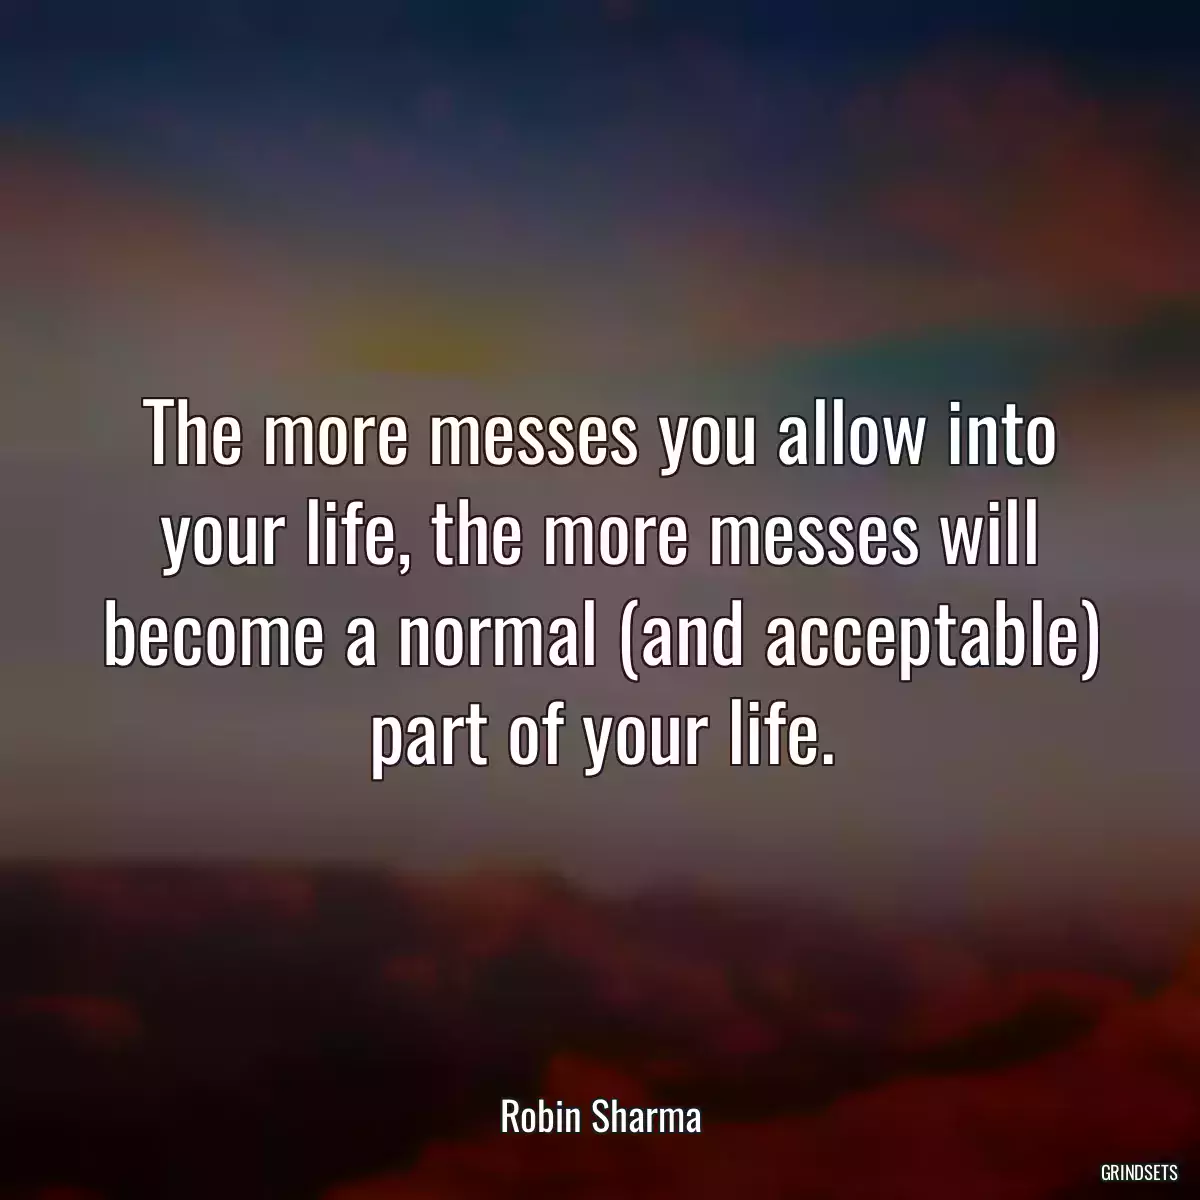 The more messes you allow into your life, the more messes will become a normal (and acceptable) part of your life.